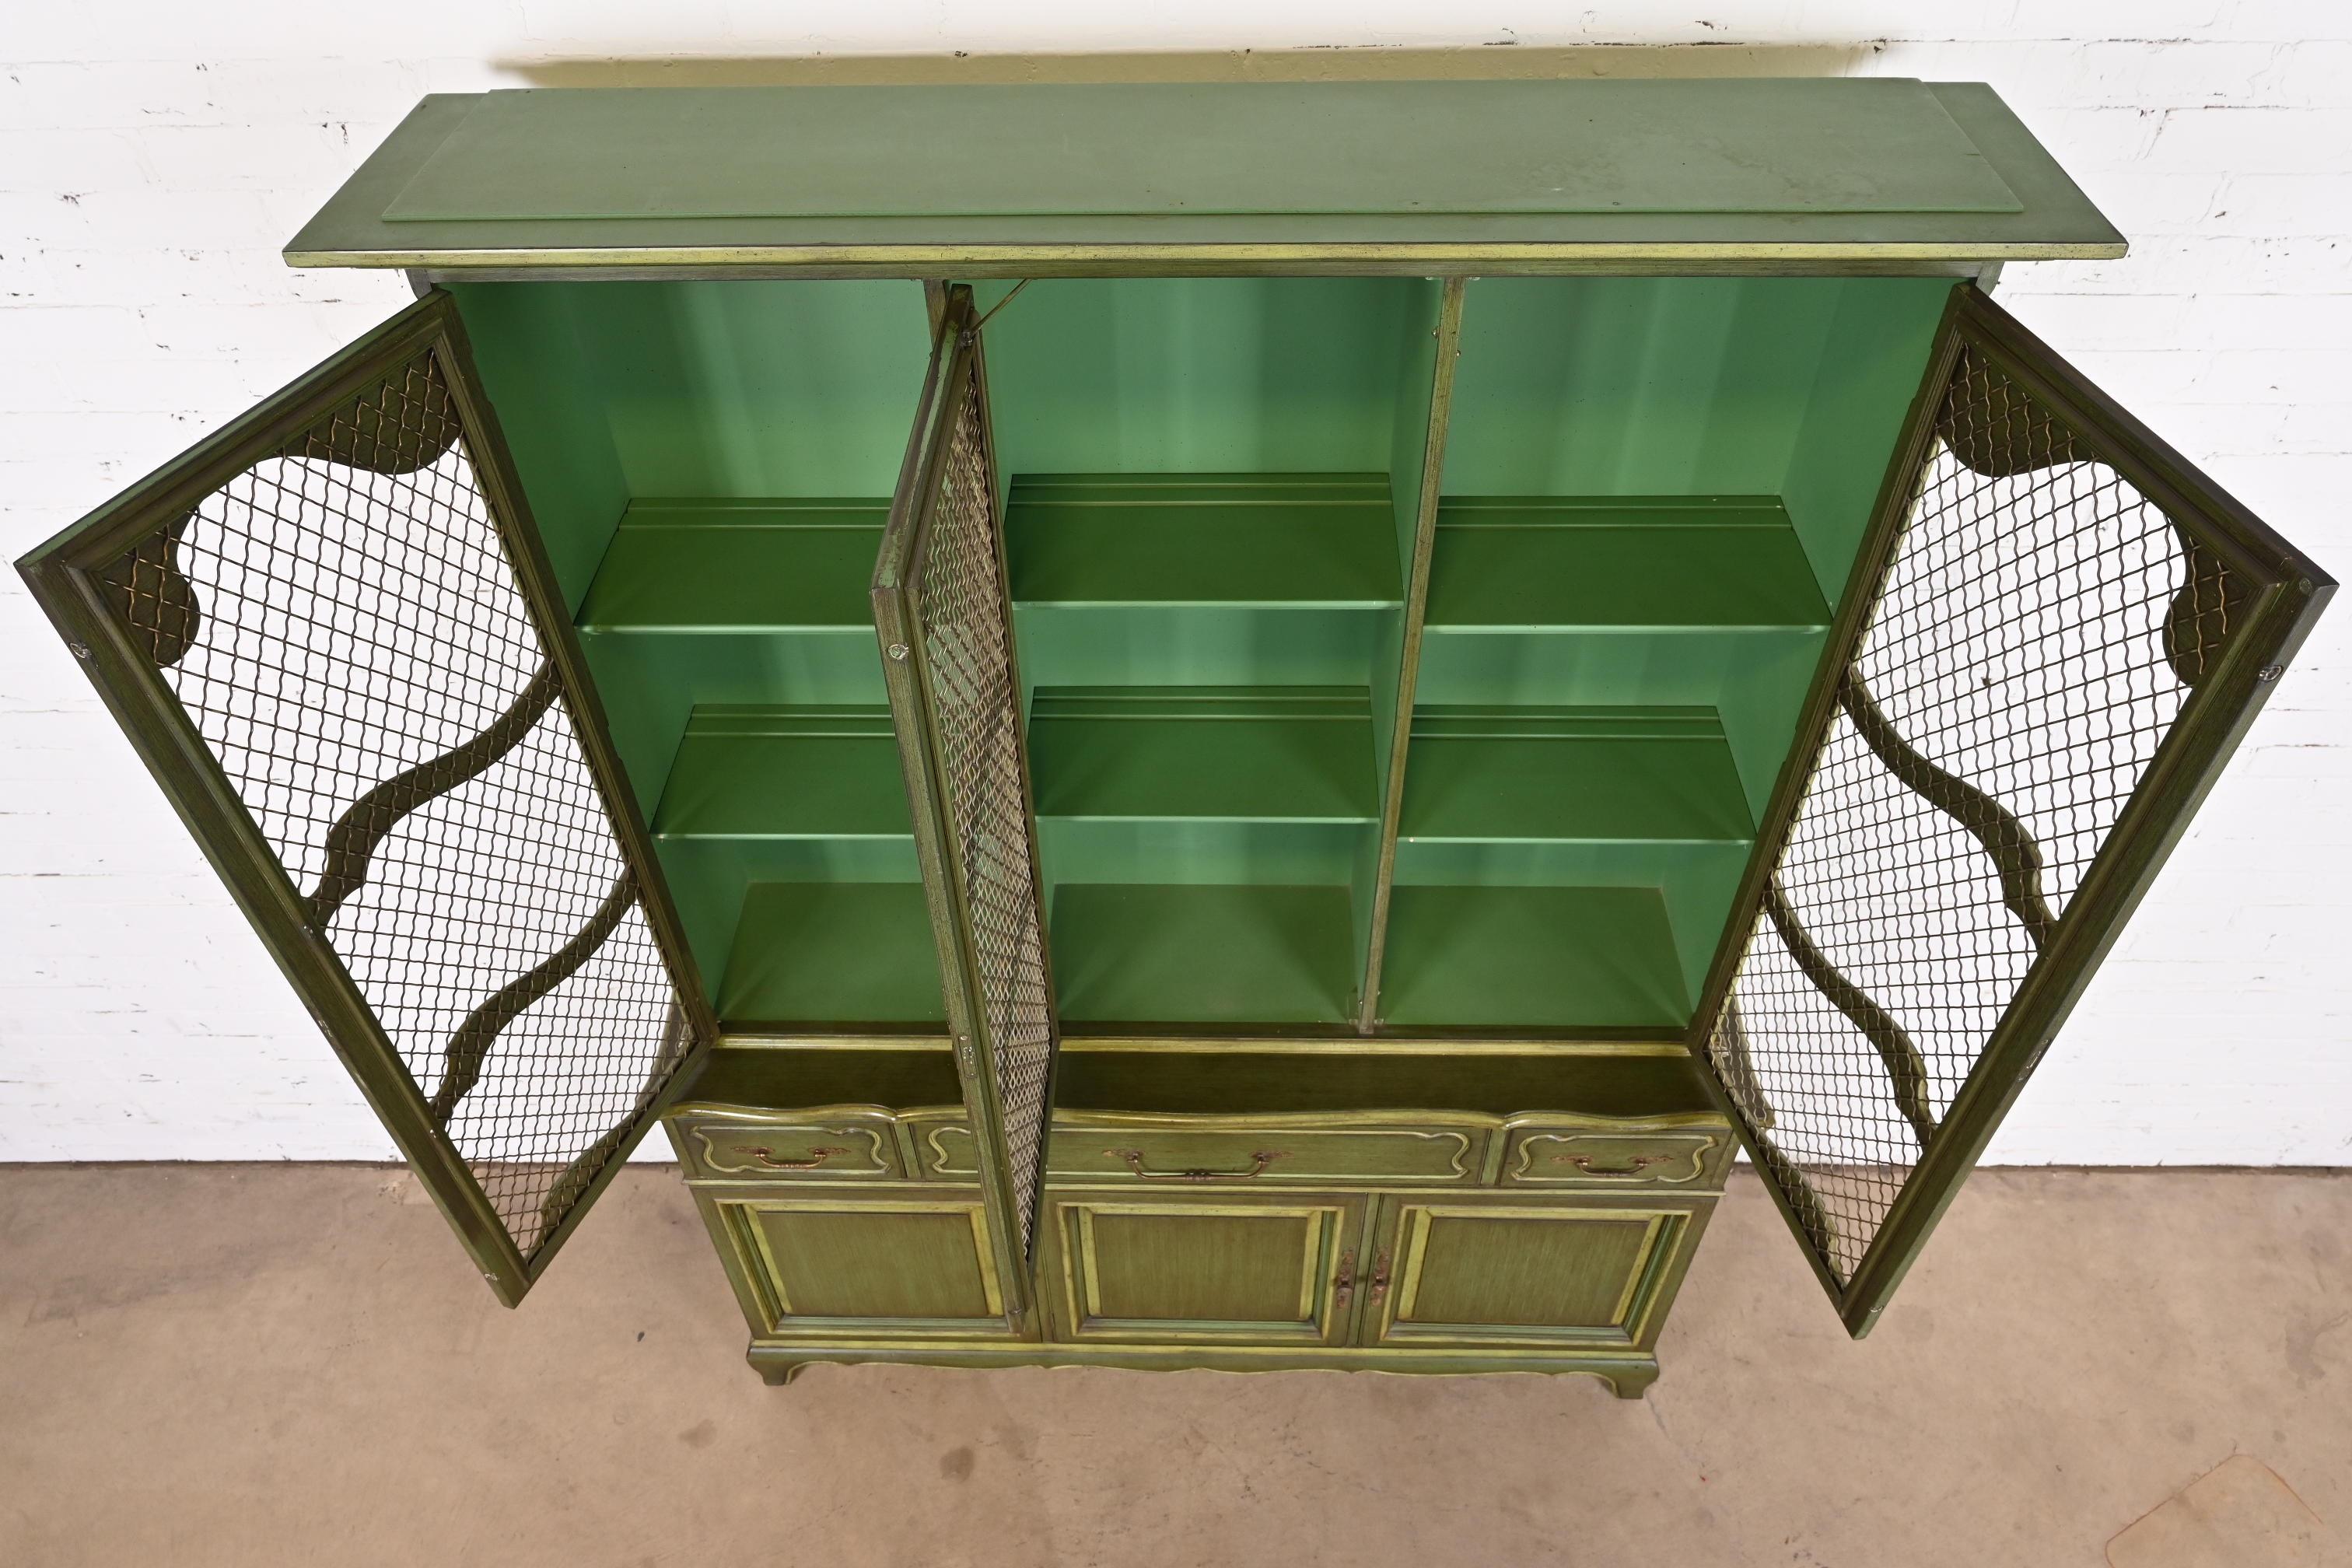 Karges French Provincial Louis XV Green Lacquered Breakfront Bookcase Cabinet 2